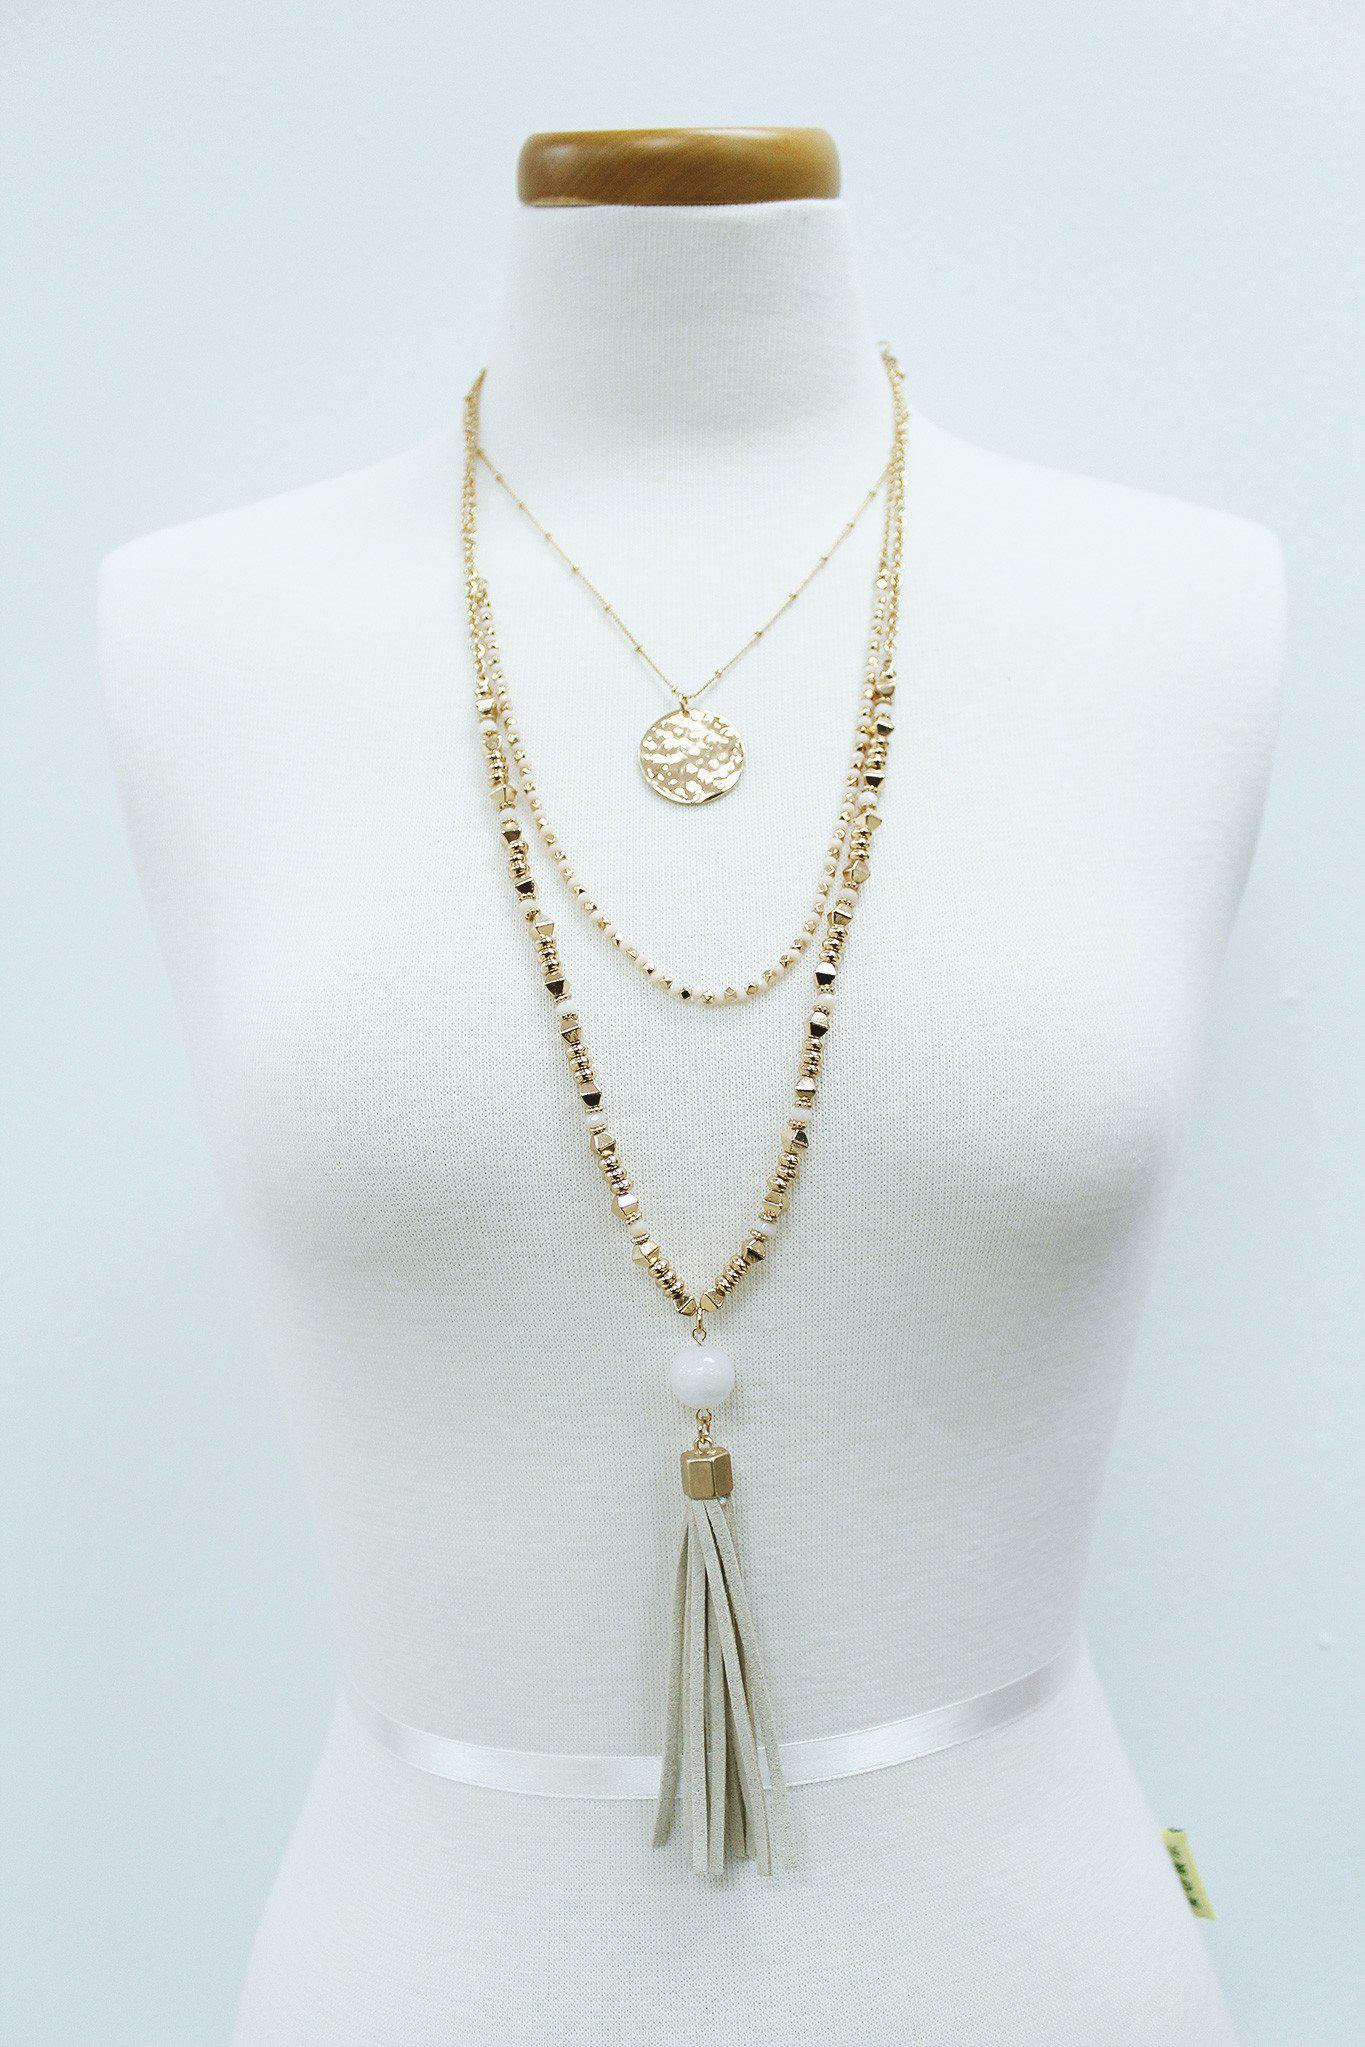 ivory and gold layered necklace with tassel